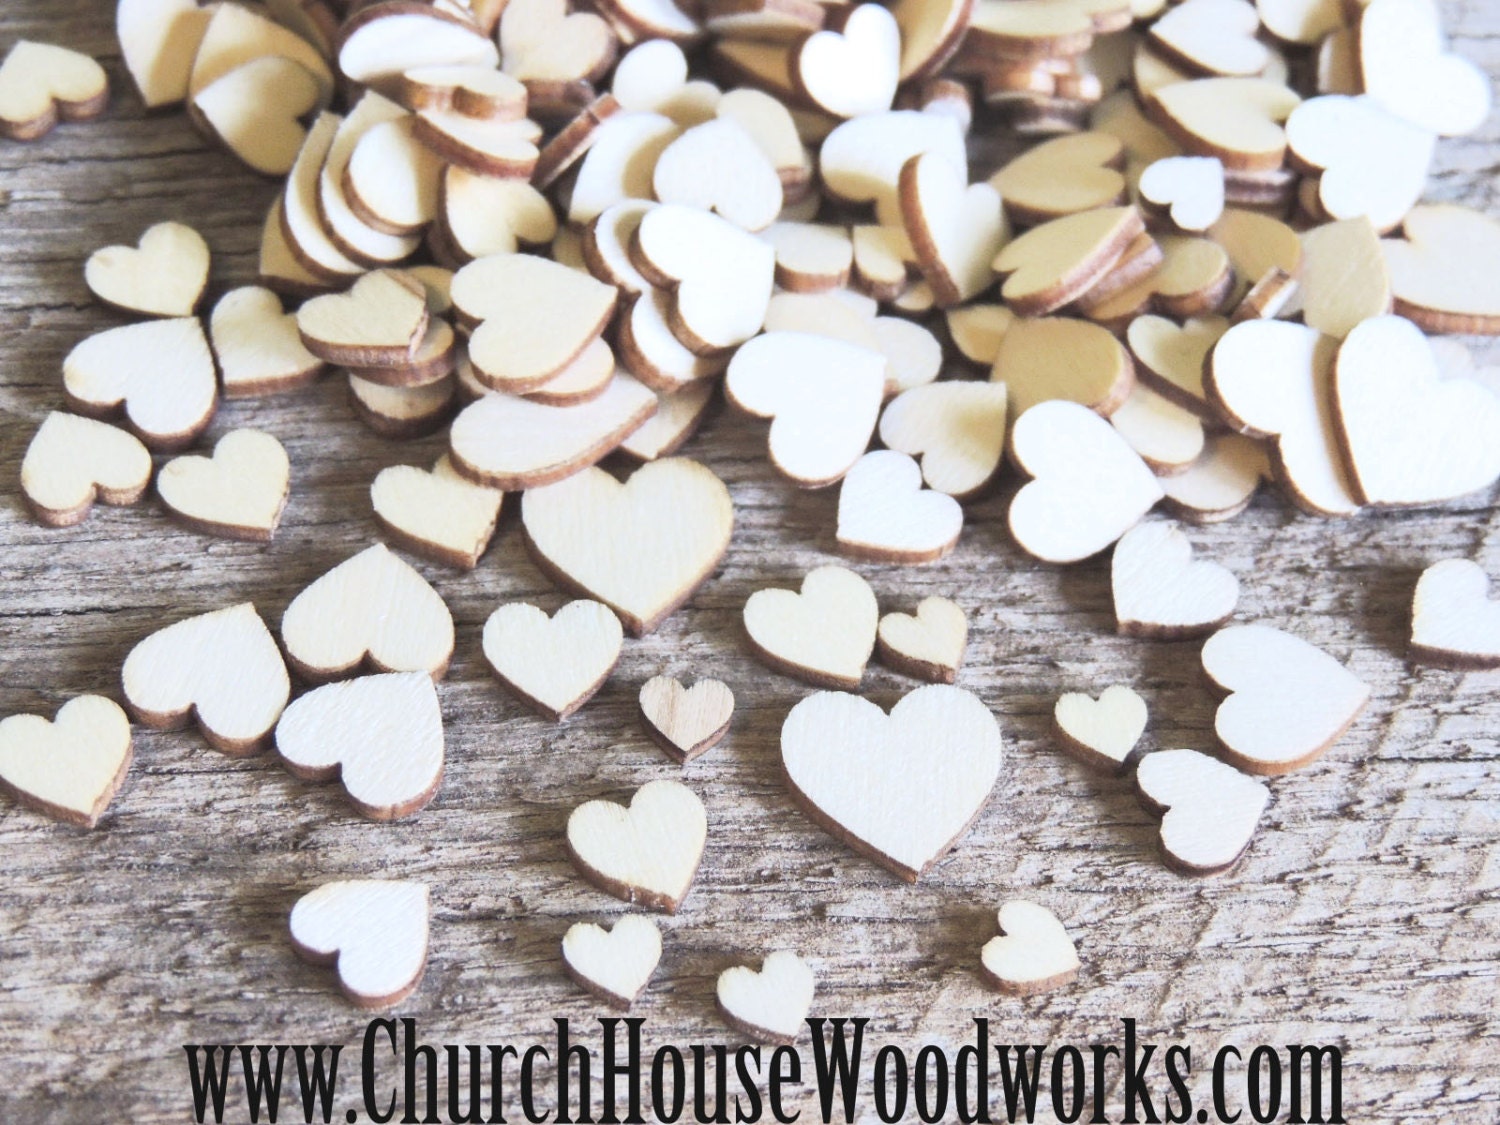 100 Pieces Small White Wooden Heart Shapes Crafts Cut Rustic Heart Wedding  Table Scatter Decoration Crafts 